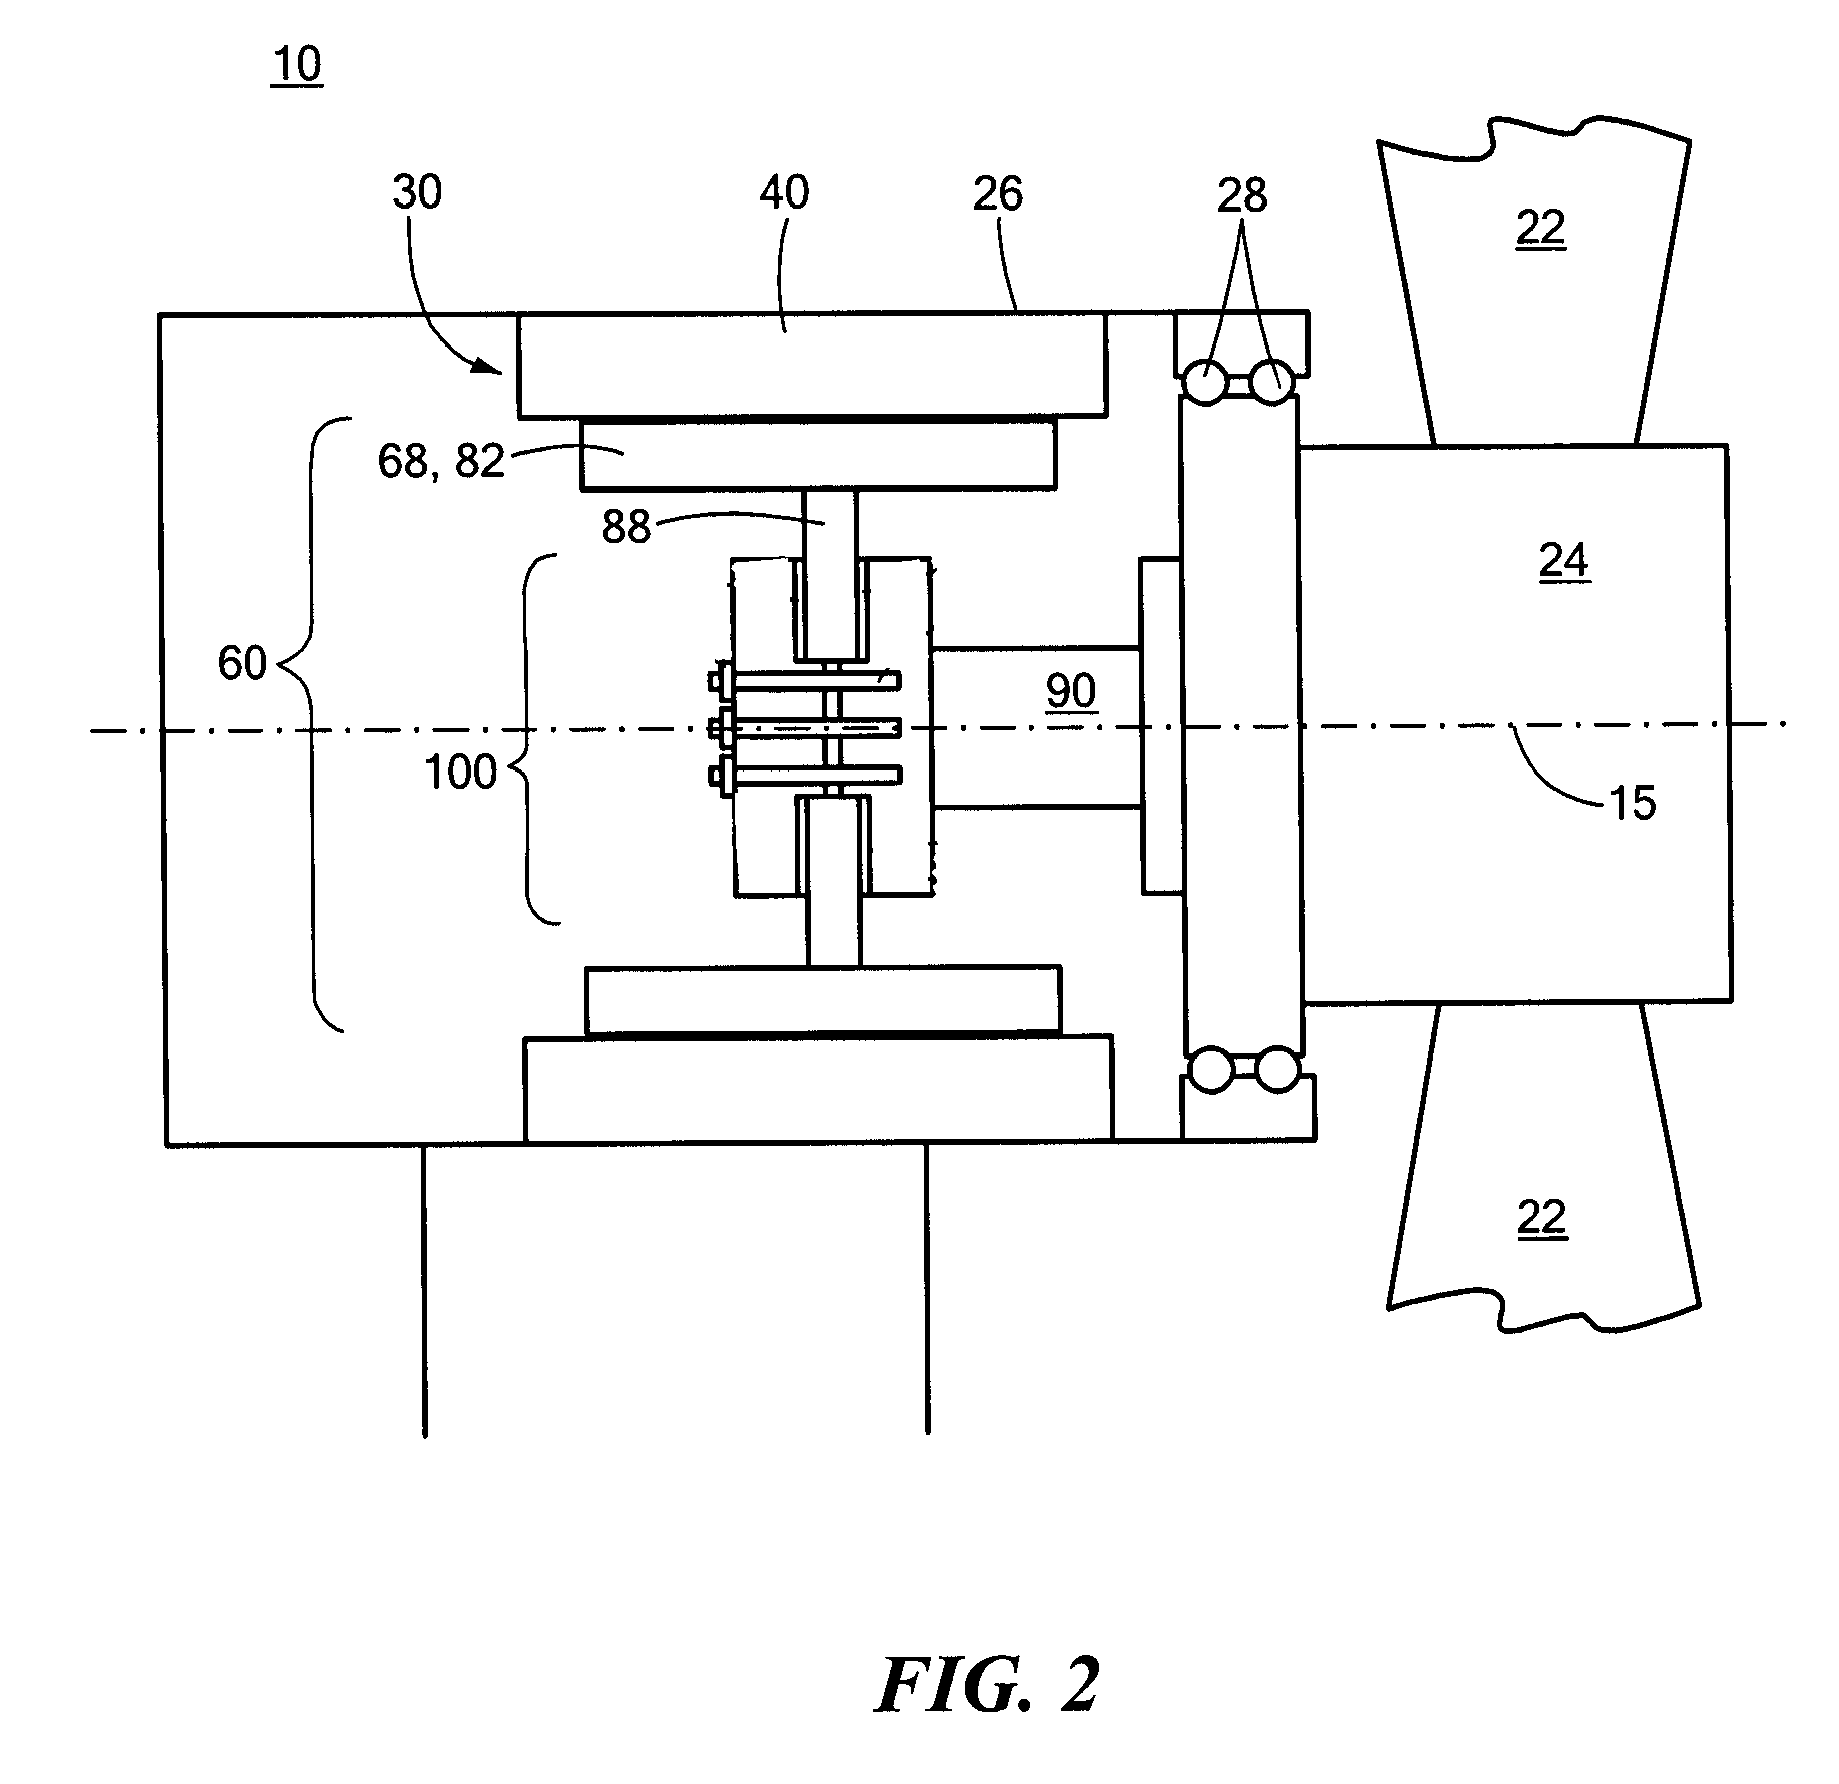 Wide electrical conductor having high C-axis strength